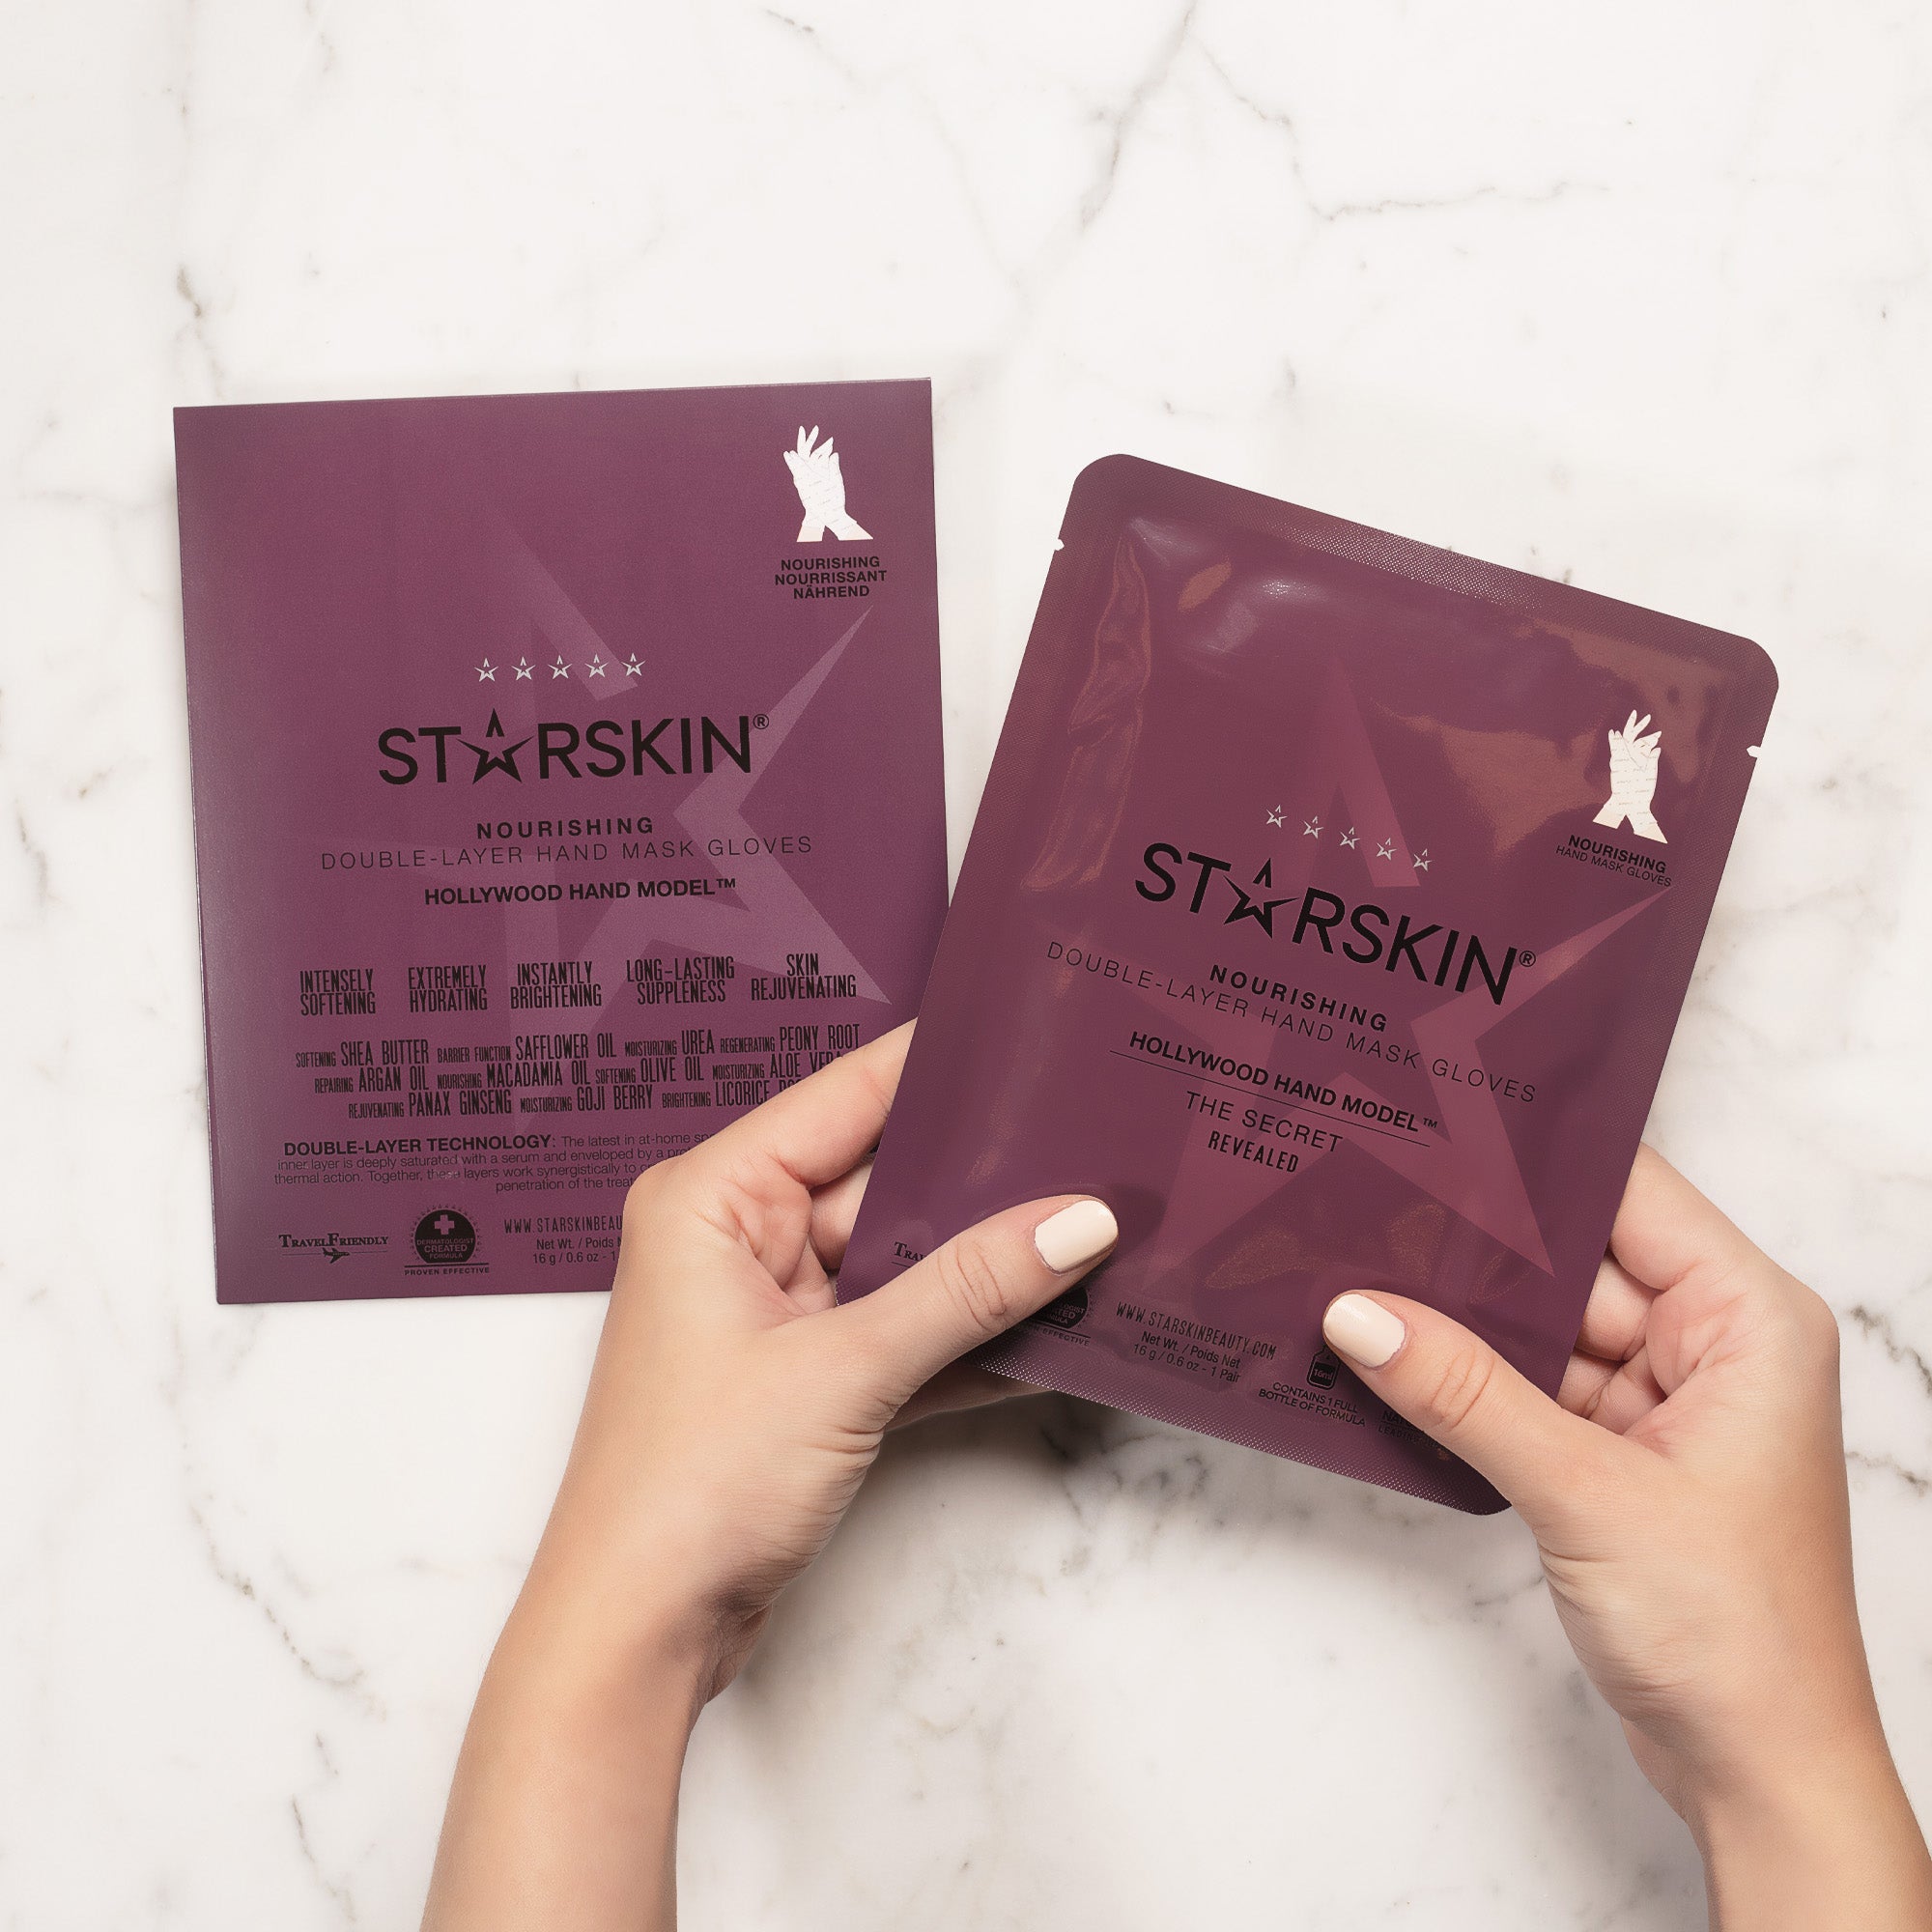 Starskins hollywood hand model packaging on the left while on the rightside the sachet is being held in two hand